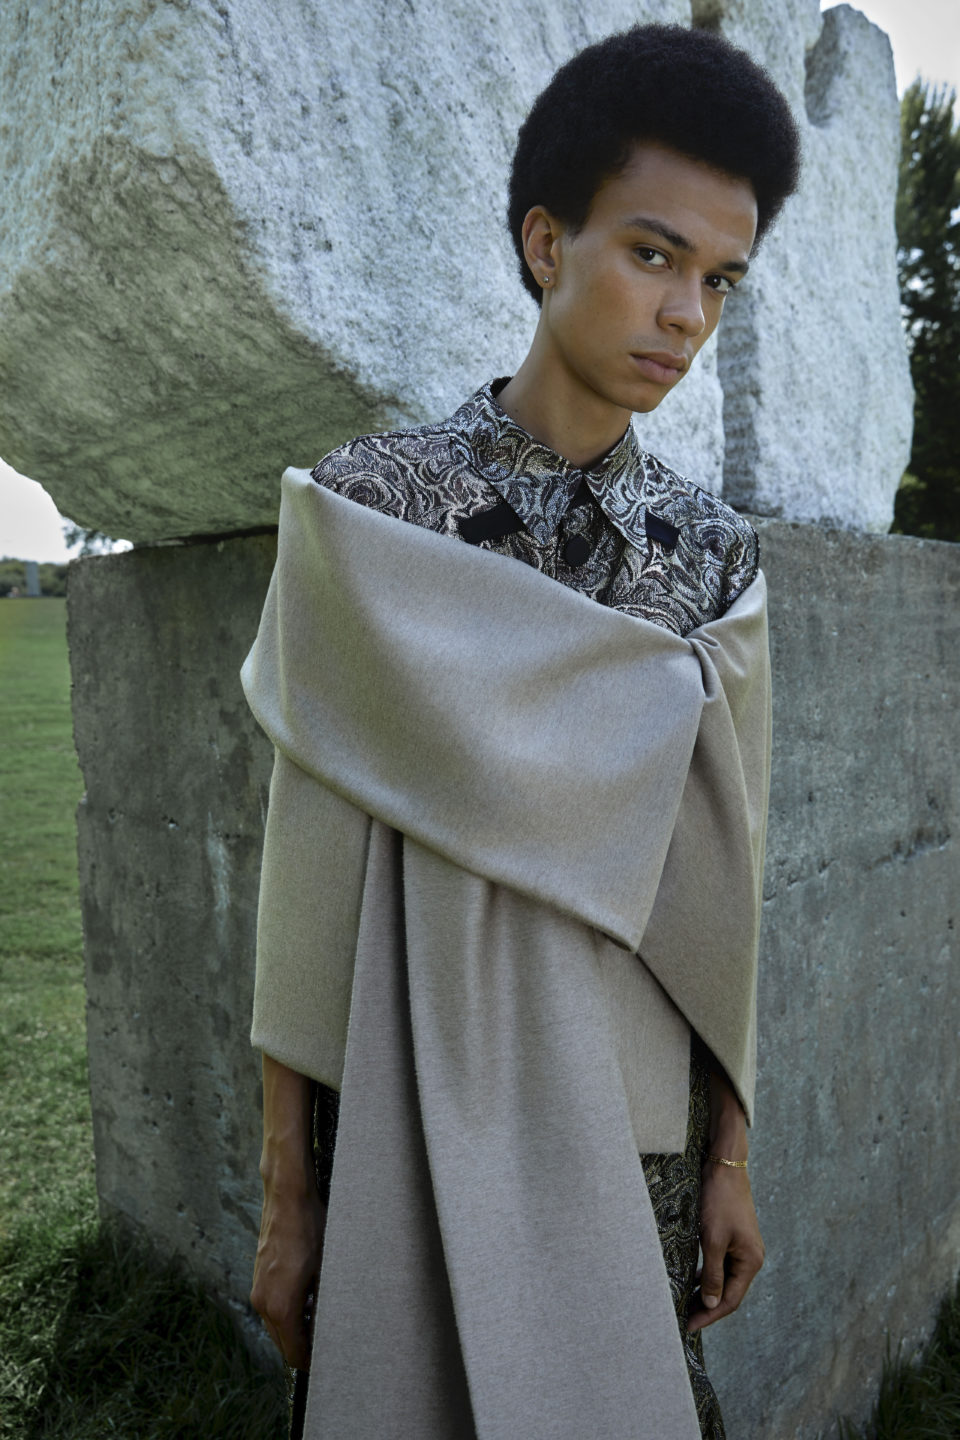 Camel Cashmere Shawl from fall winter 2021 - MAR by Maria Karimi